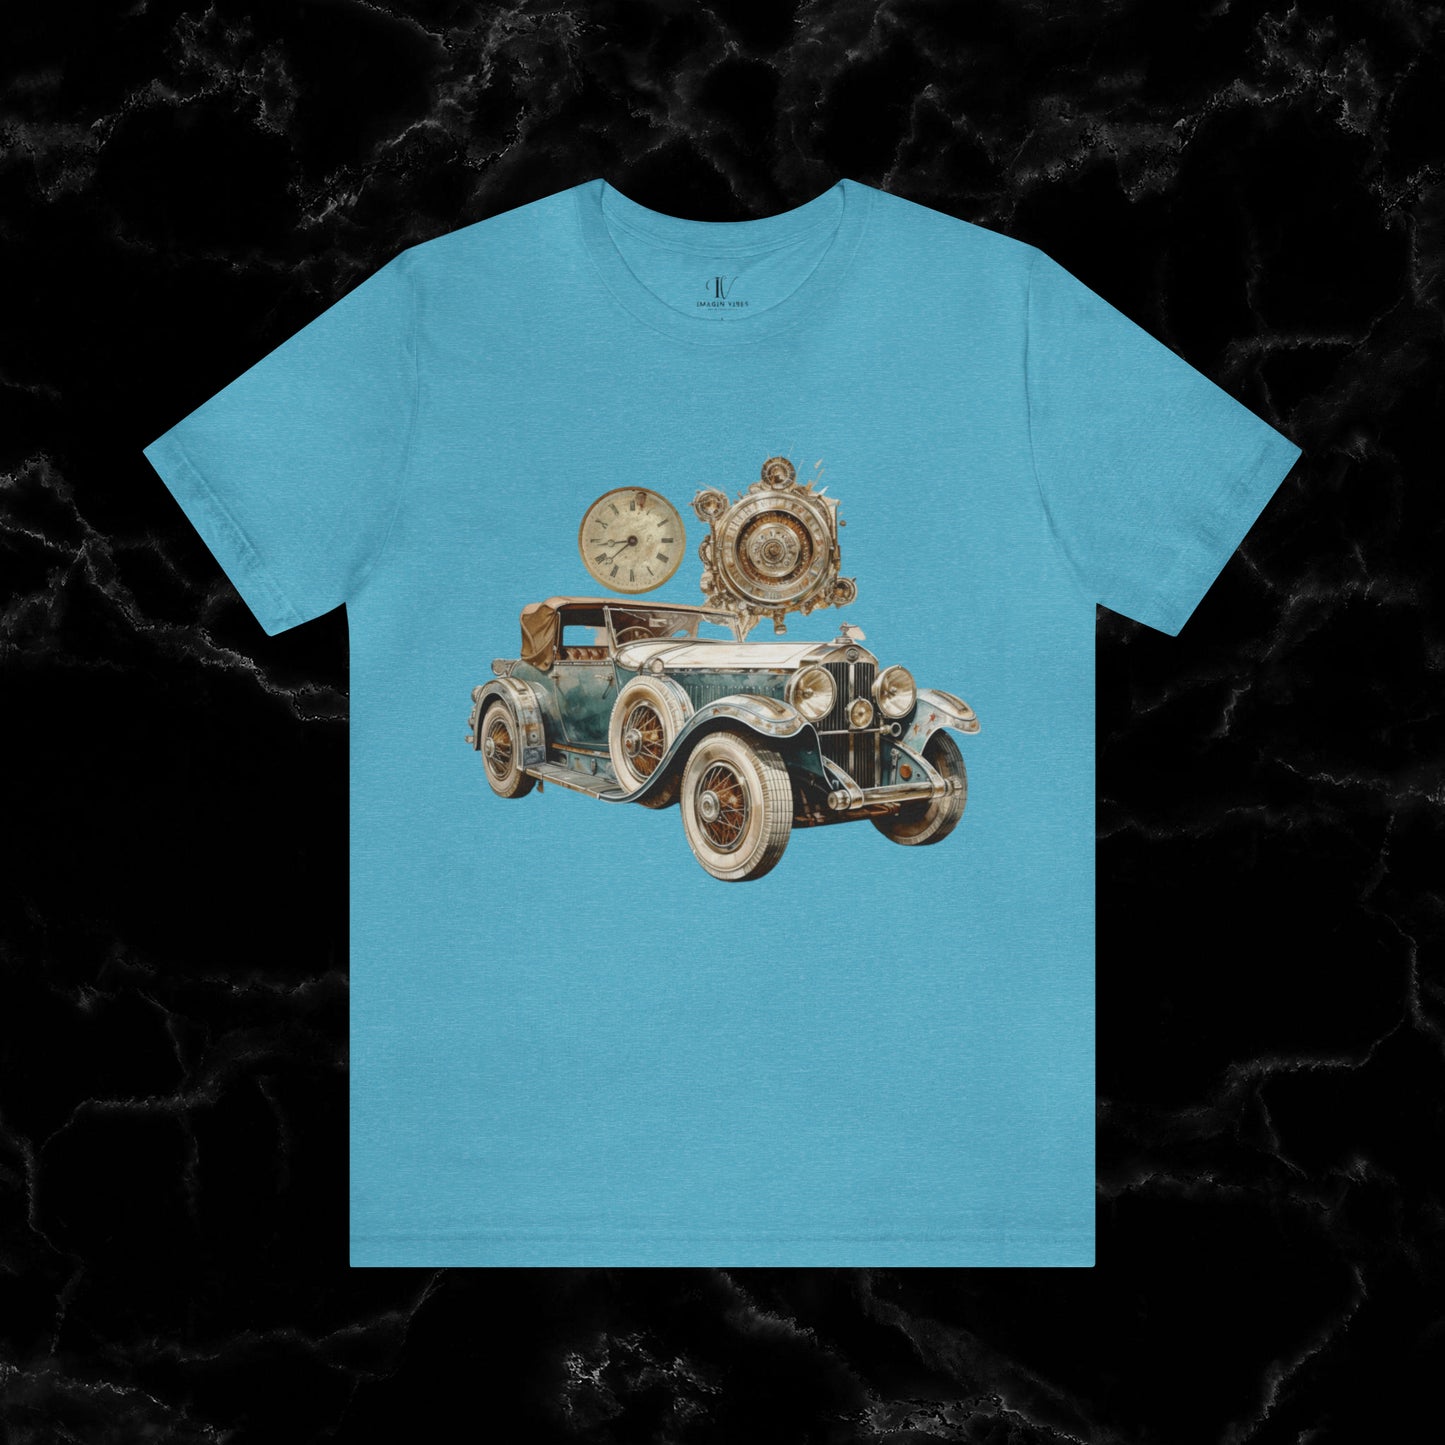 Vintage Car Enthusiast T-Shirt - Classic Wheels and Timeless Appeal T-Shirt Heather Aqua S 